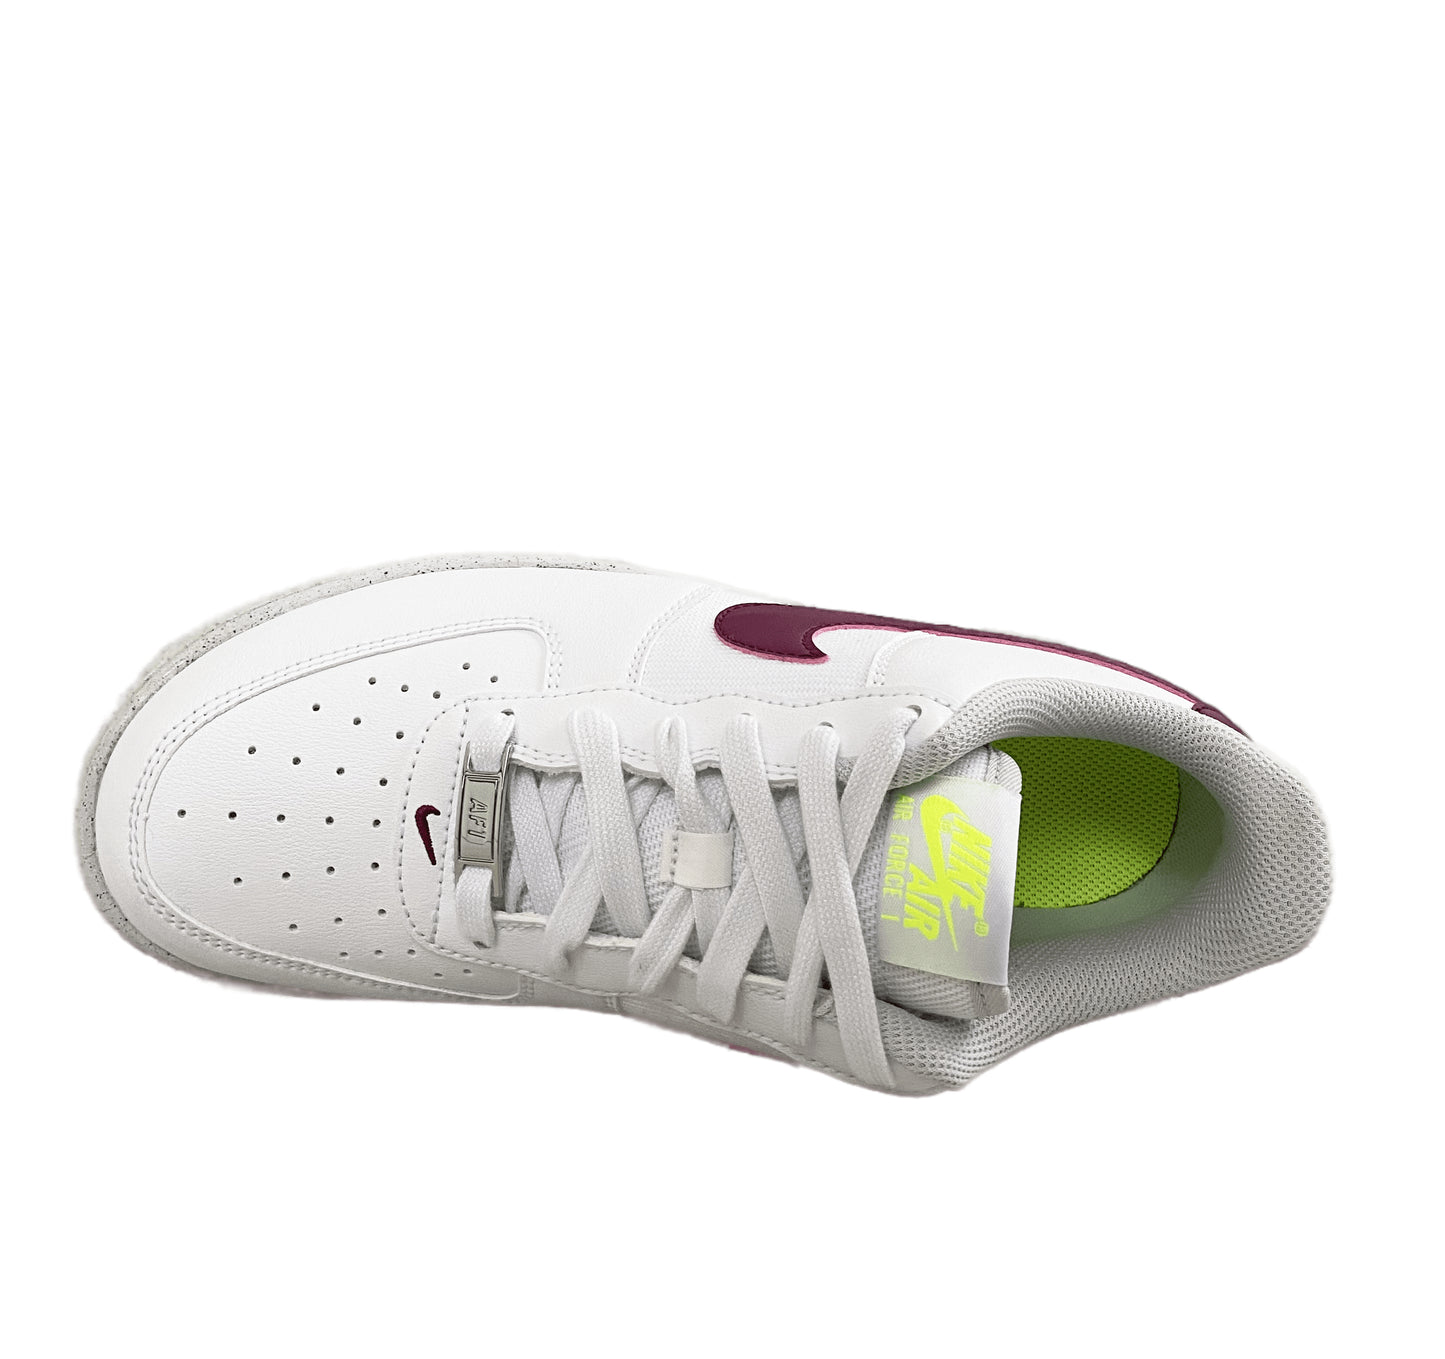 NIKE AIR FORCE 1 LOW CRATER "WHITE SANGRIA" NEXT NATURE (GS)